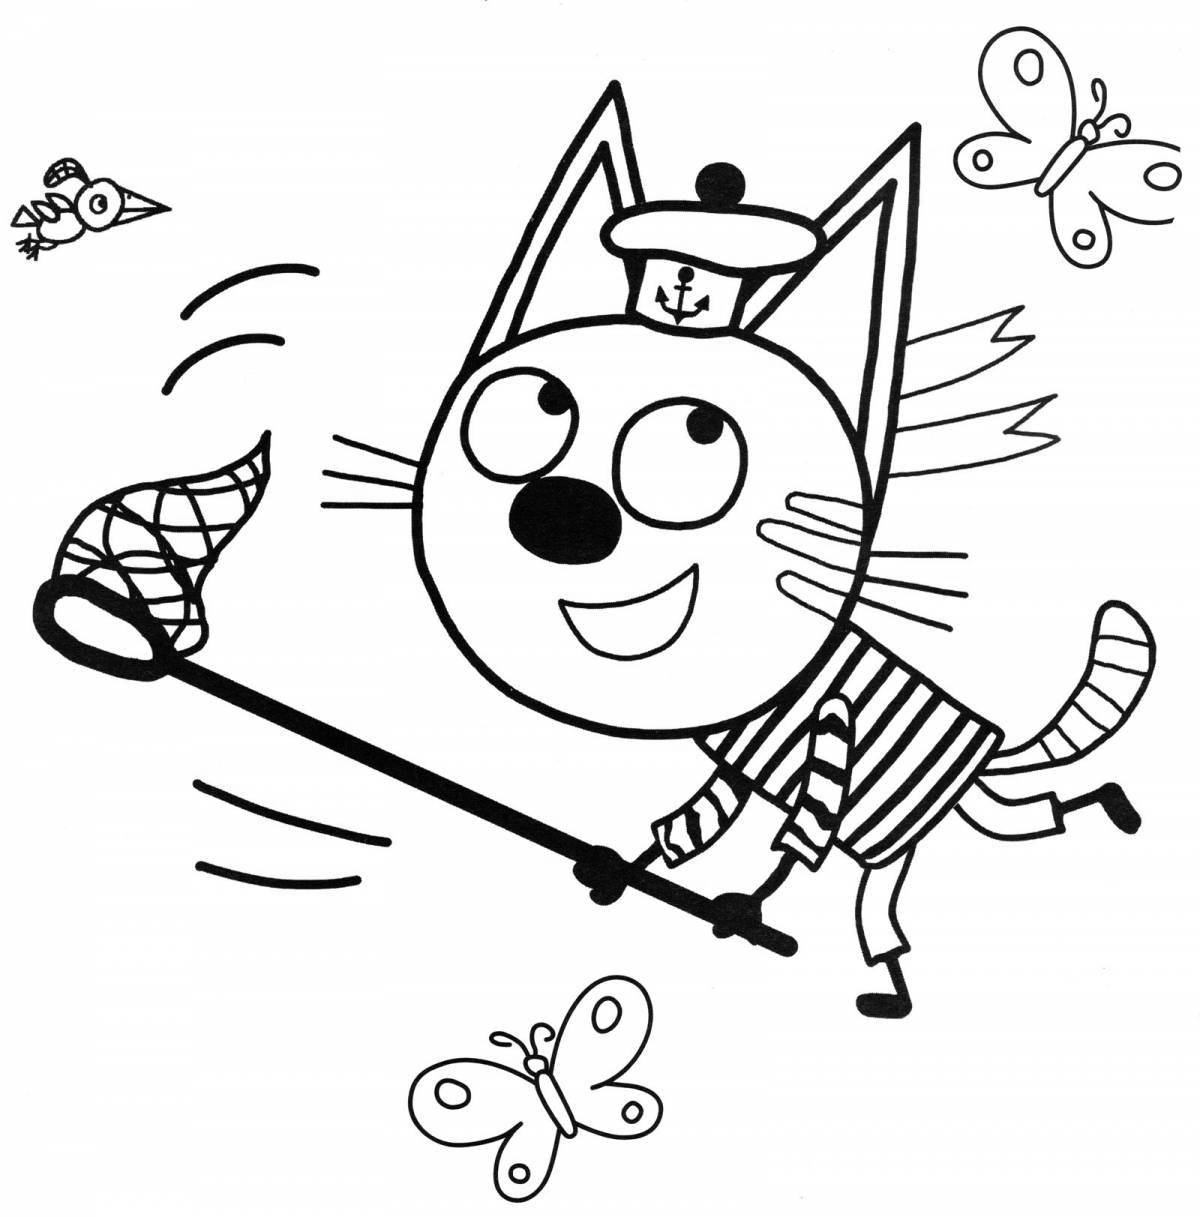 3 cats colorful coloring page